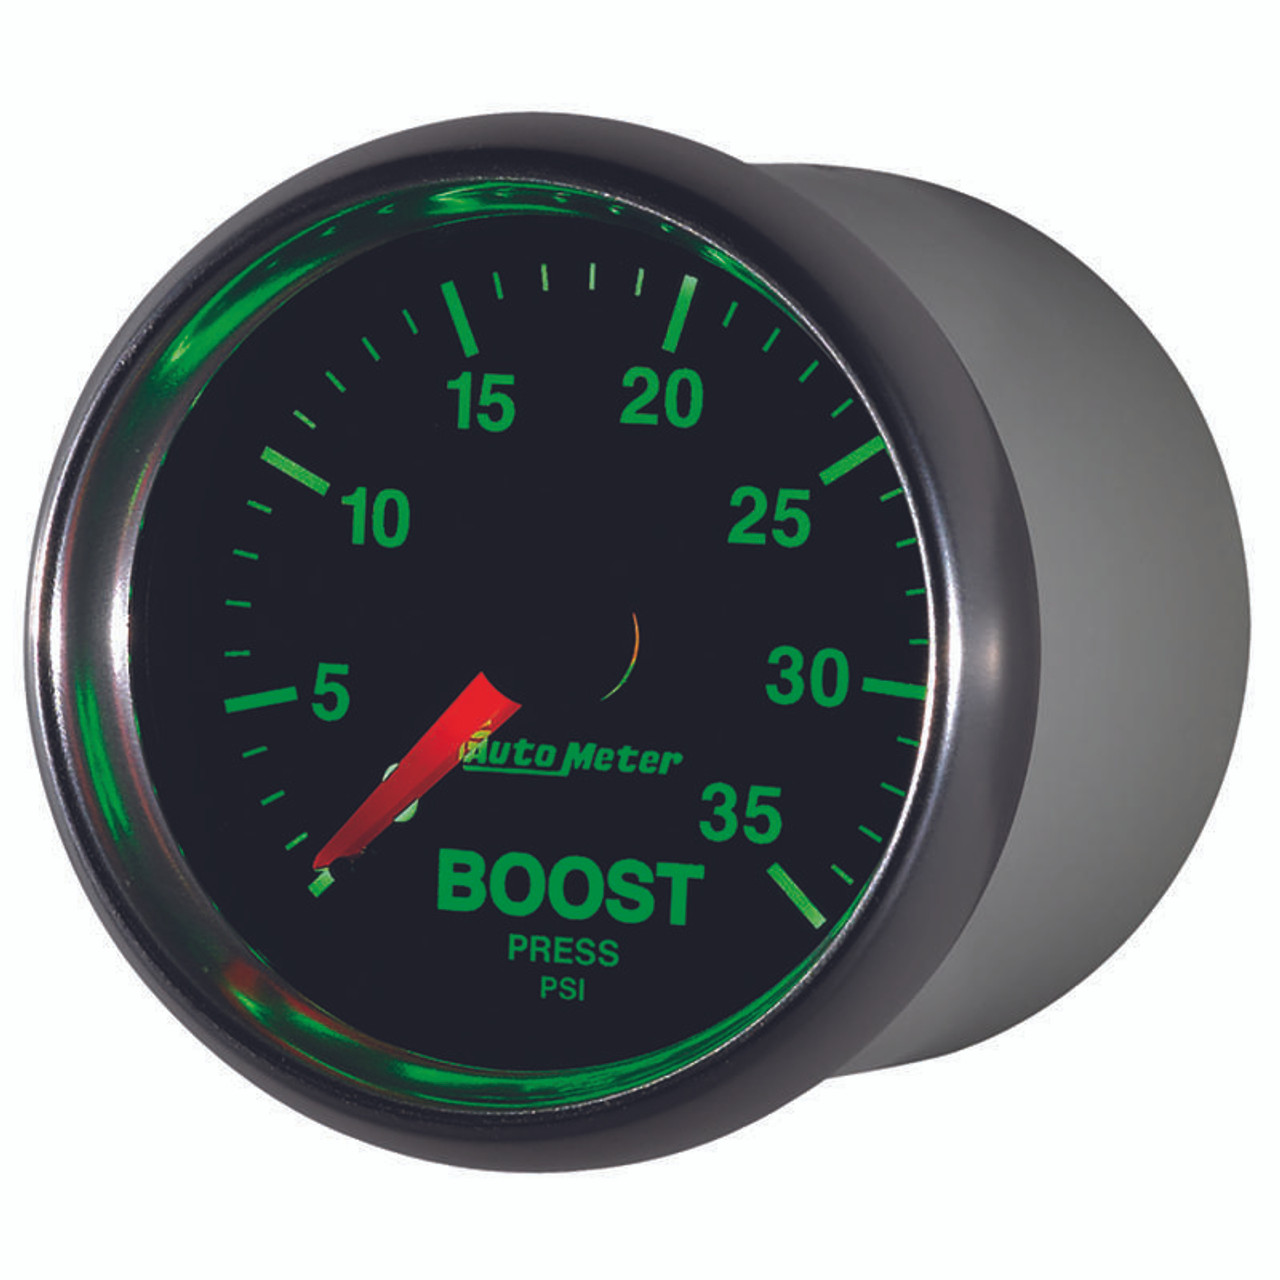 Autometer AutoMeter GS 2 1/16 inch 35PSI Mechanical Boost Gauge - 3804